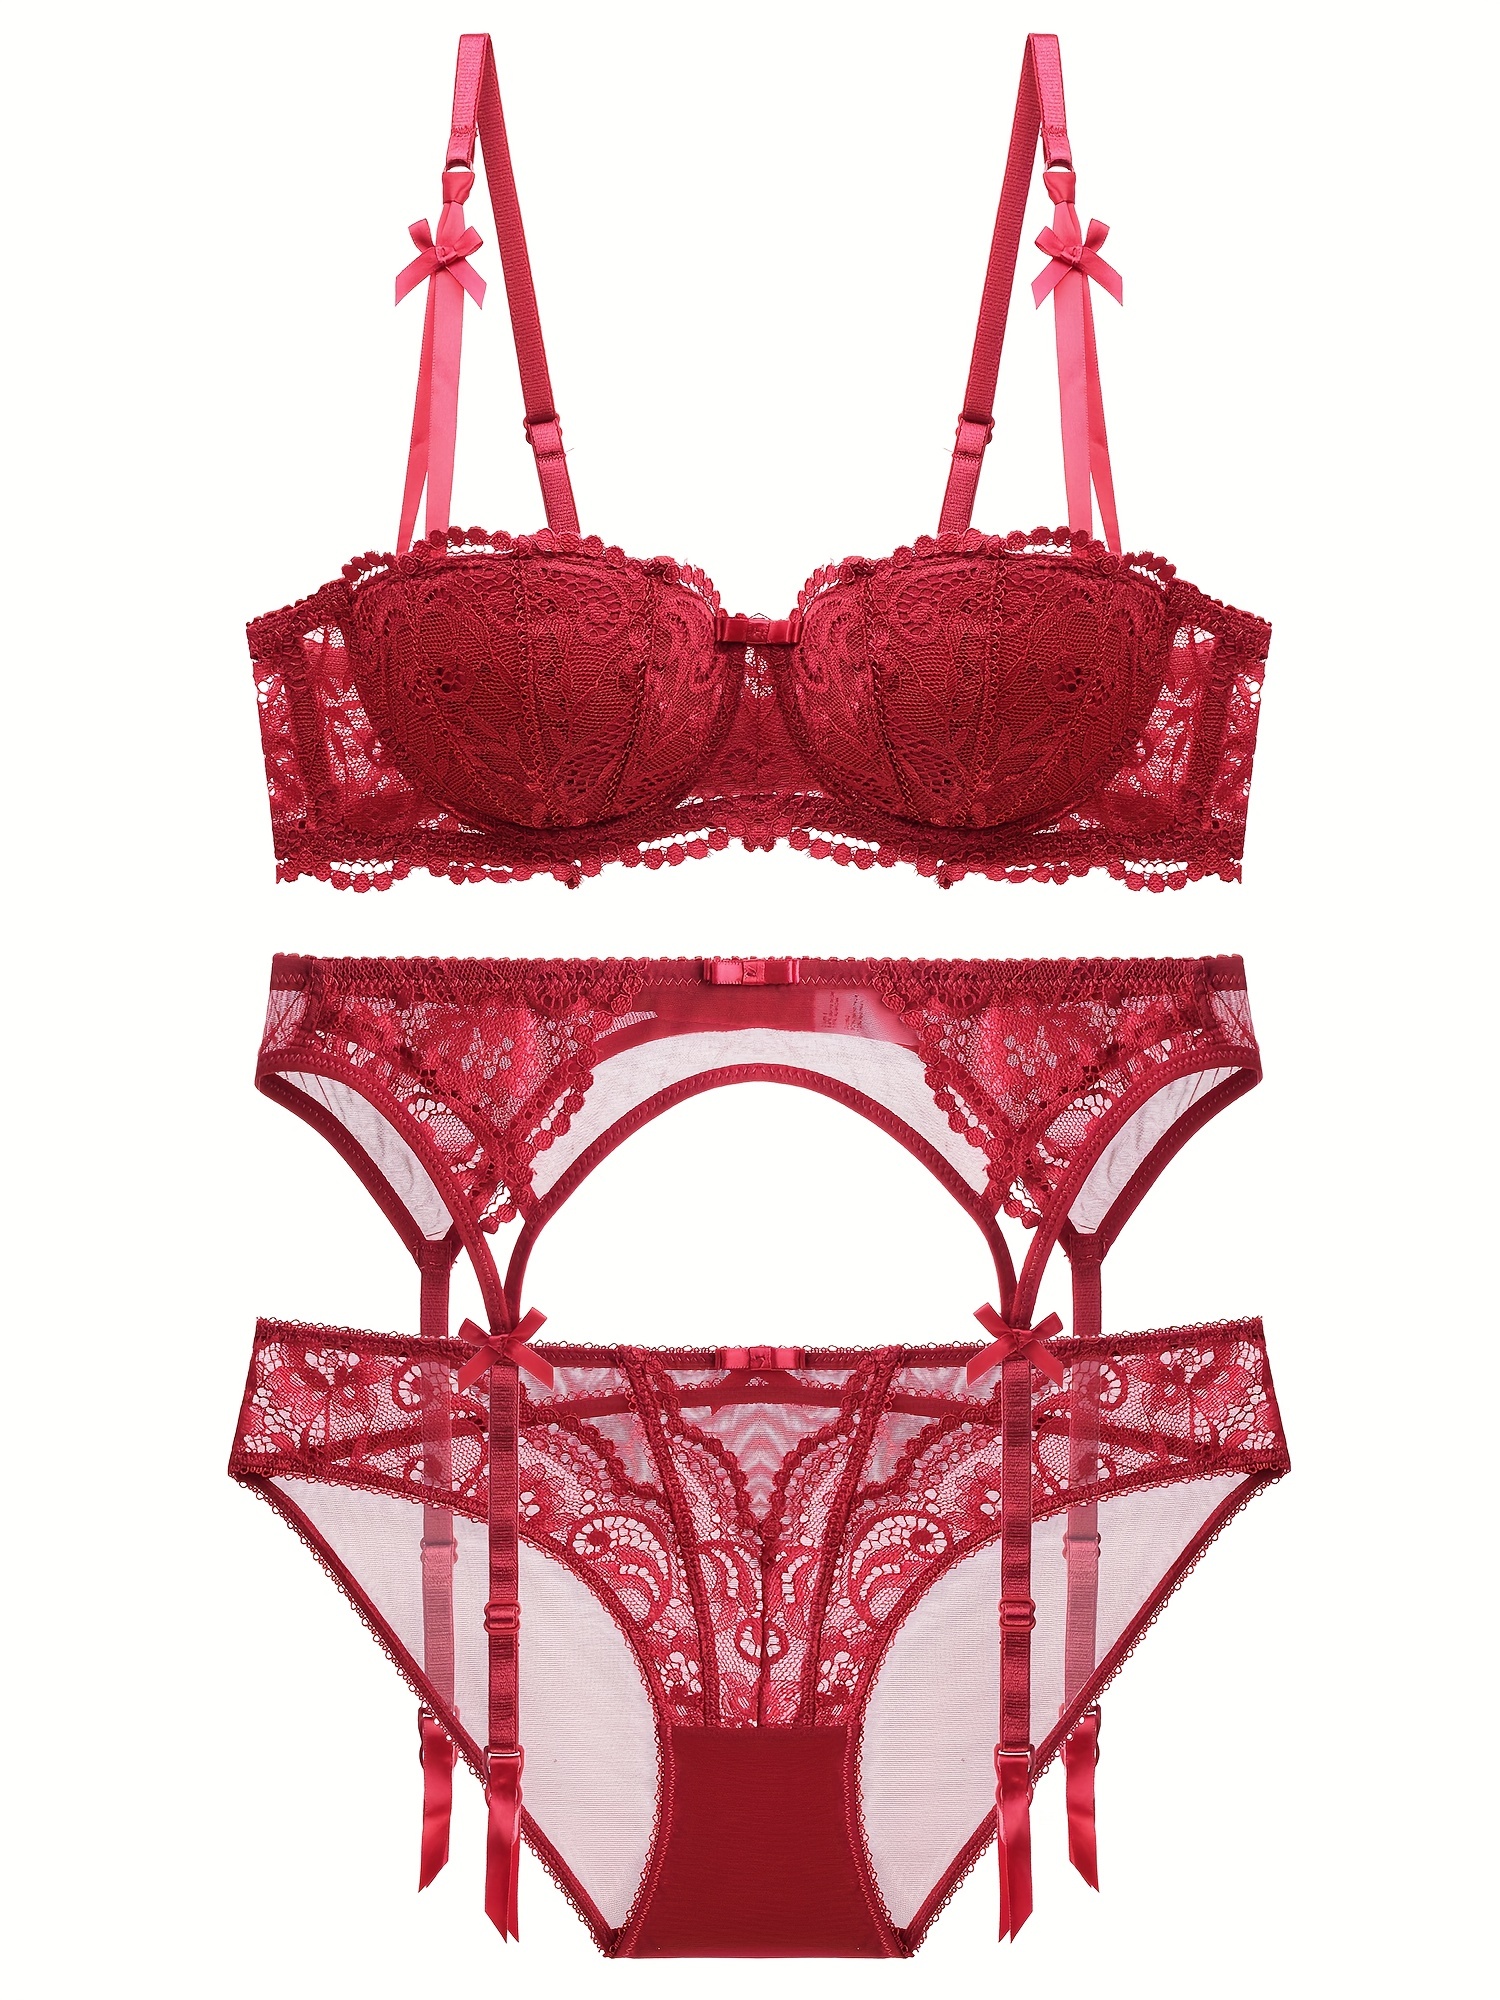 Attractive Maroon Floral Lace Bra Panty Set